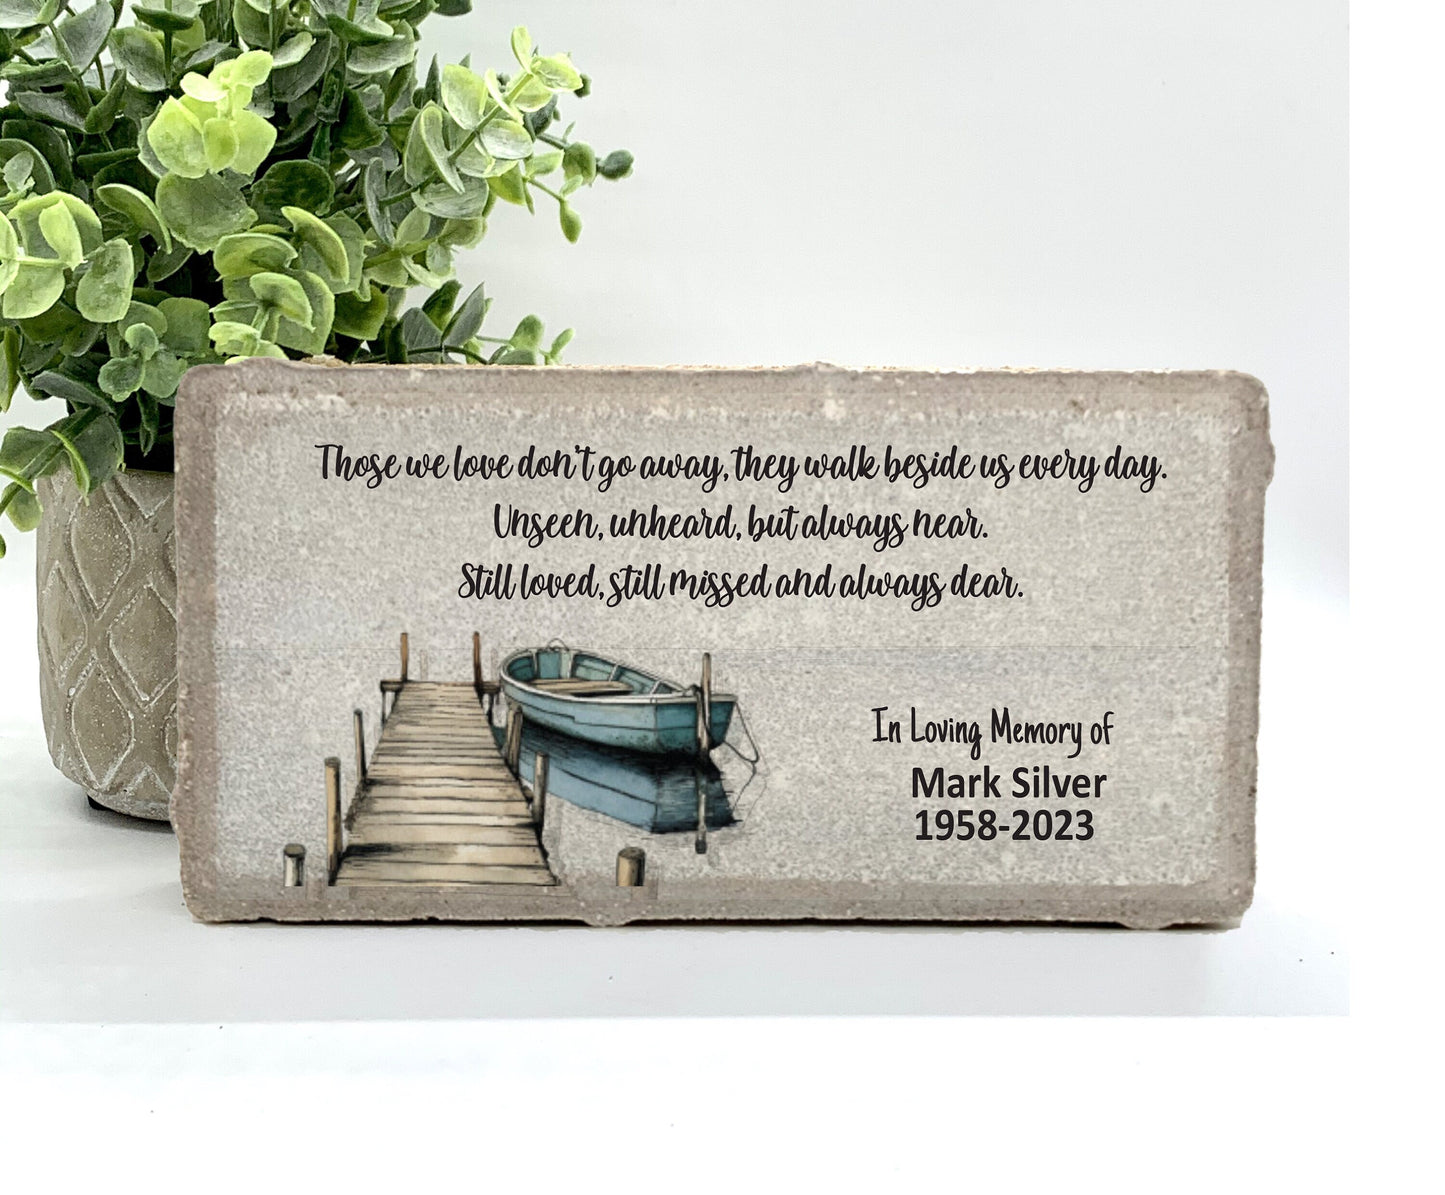 Personalized Boater Memorial Gift with a variety of indoor and outdoor stone choices at www.florida-funshine.com. Our Personalized Family And Friends Memorial Stones serve as heartfelt sympathy gifts for those grieving the loss of a loved one, ensuring a lasting tribute cherished for years. Enjoy free personalization, quick shipping in 1-2 business days, and quality crafted memorials made in the USA.